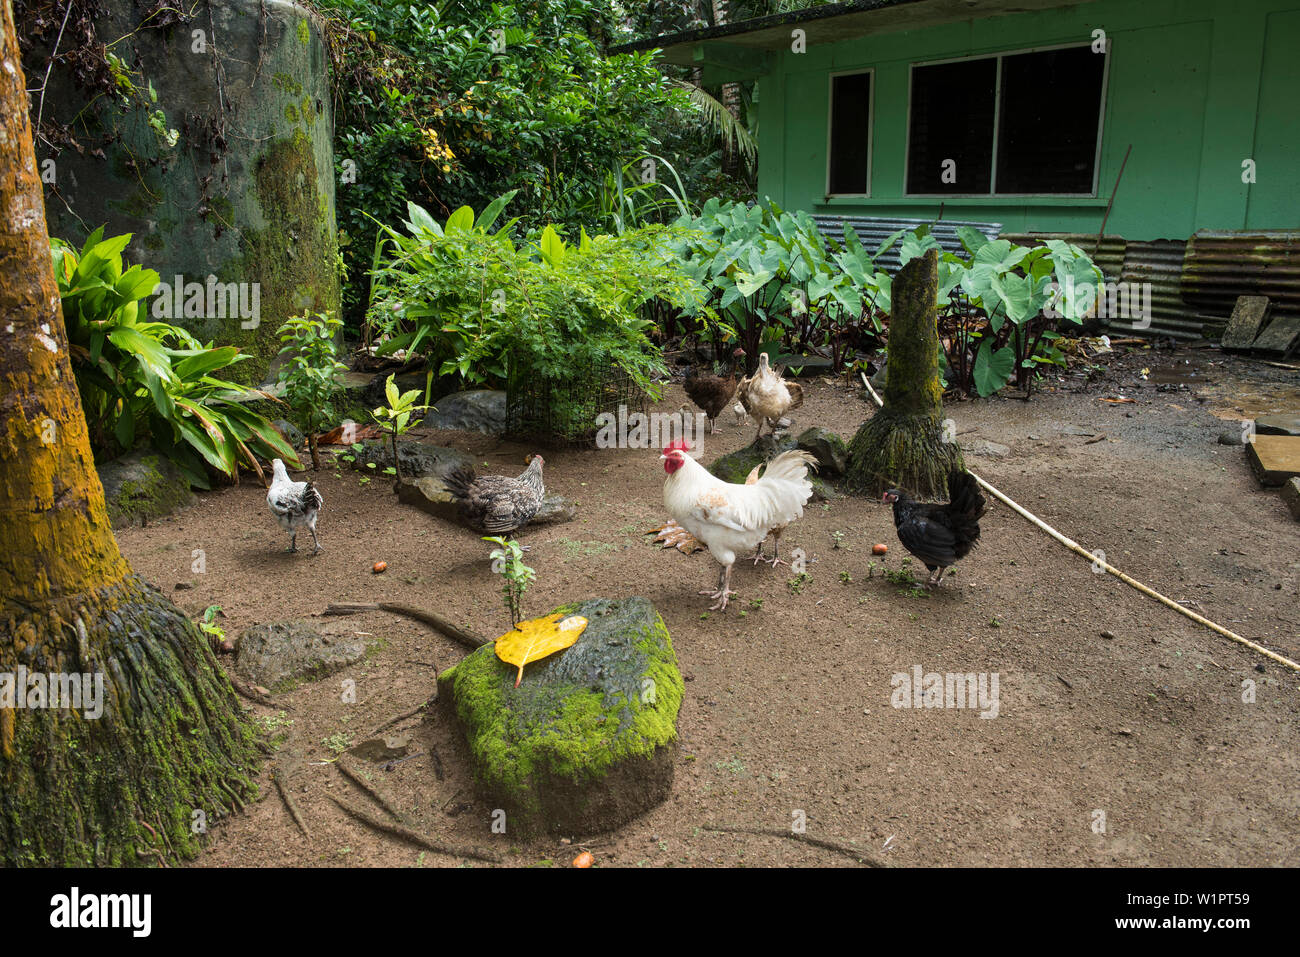 Chickens forage in the yard of a green house surrounded by lush foliage, Pohnpei Island, Pohnpei, Federated States of Micronesia, South Pacific Stock Photo